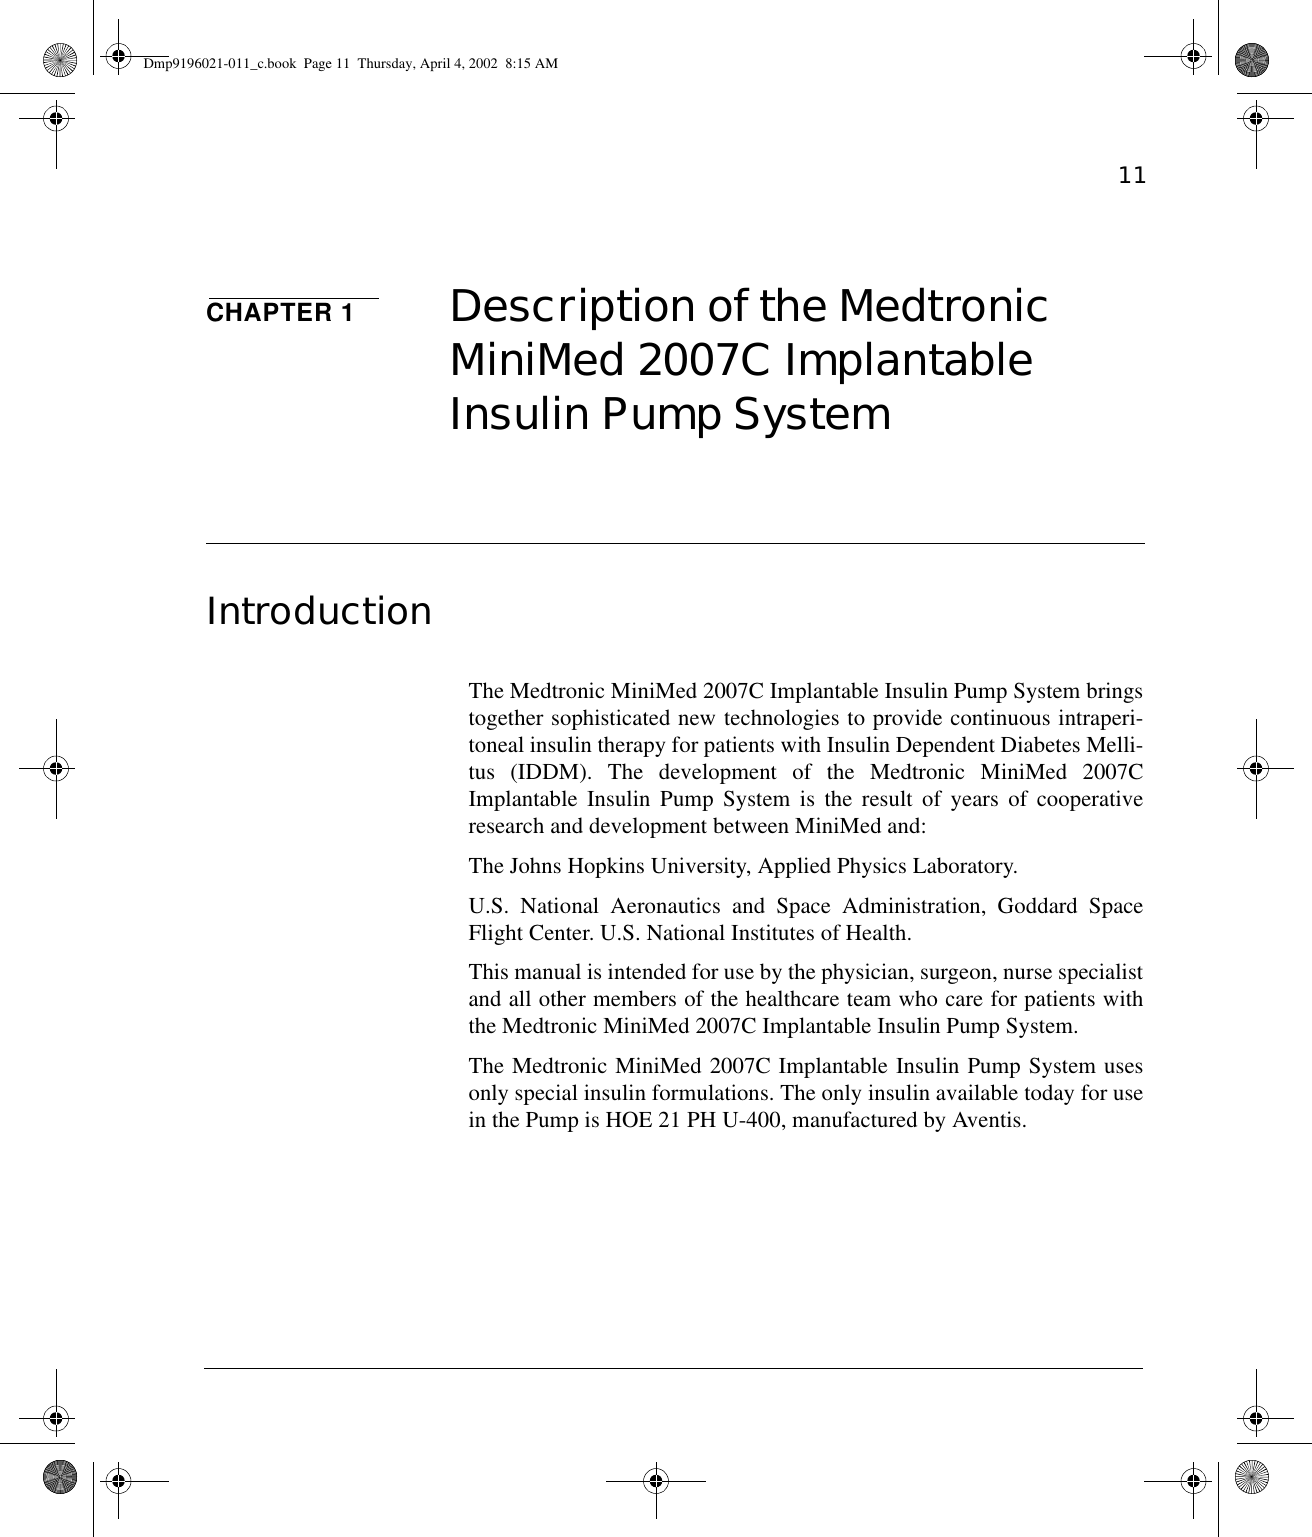 11CHAPTER 1 Description of the Medtronic MiniMed 2007C Implantable Insulin Pump SystemIntroductionThe Medtronic MiniMed 2007C Implantable Insulin Pump System bringstogether sophisticated new technologies to provide continuous intraperi-toneal insulin therapy for patients with Insulin Dependent Diabetes Melli-tus (IDDM). The development of the Medtronic MiniMed 2007CImplantable Insulin Pump System is the result of years of cooperativeresearch and development between MiniMed and:The Johns Hopkins University, Applied Physics Laboratory.U.S. National Aeronautics and Space Administration, Goddard SpaceFlight Center. U.S. National Institutes of Health.This manual is intended for use by the physician, surgeon, nurse specialistand all other members of the healthcare team who care for patients withthe Medtronic MiniMed 2007C Implantable Insulin Pump System.The Medtronic MiniMed 2007C Implantable Insulin Pump System usesonly special insulin formulations. The only insulin available today for usein the Pump is HOE 21 PH U-400, manufactured by Aventis.Dmp9196021-011_c.book  Page 11  Thursday, April 4, 2002  8:15 AM